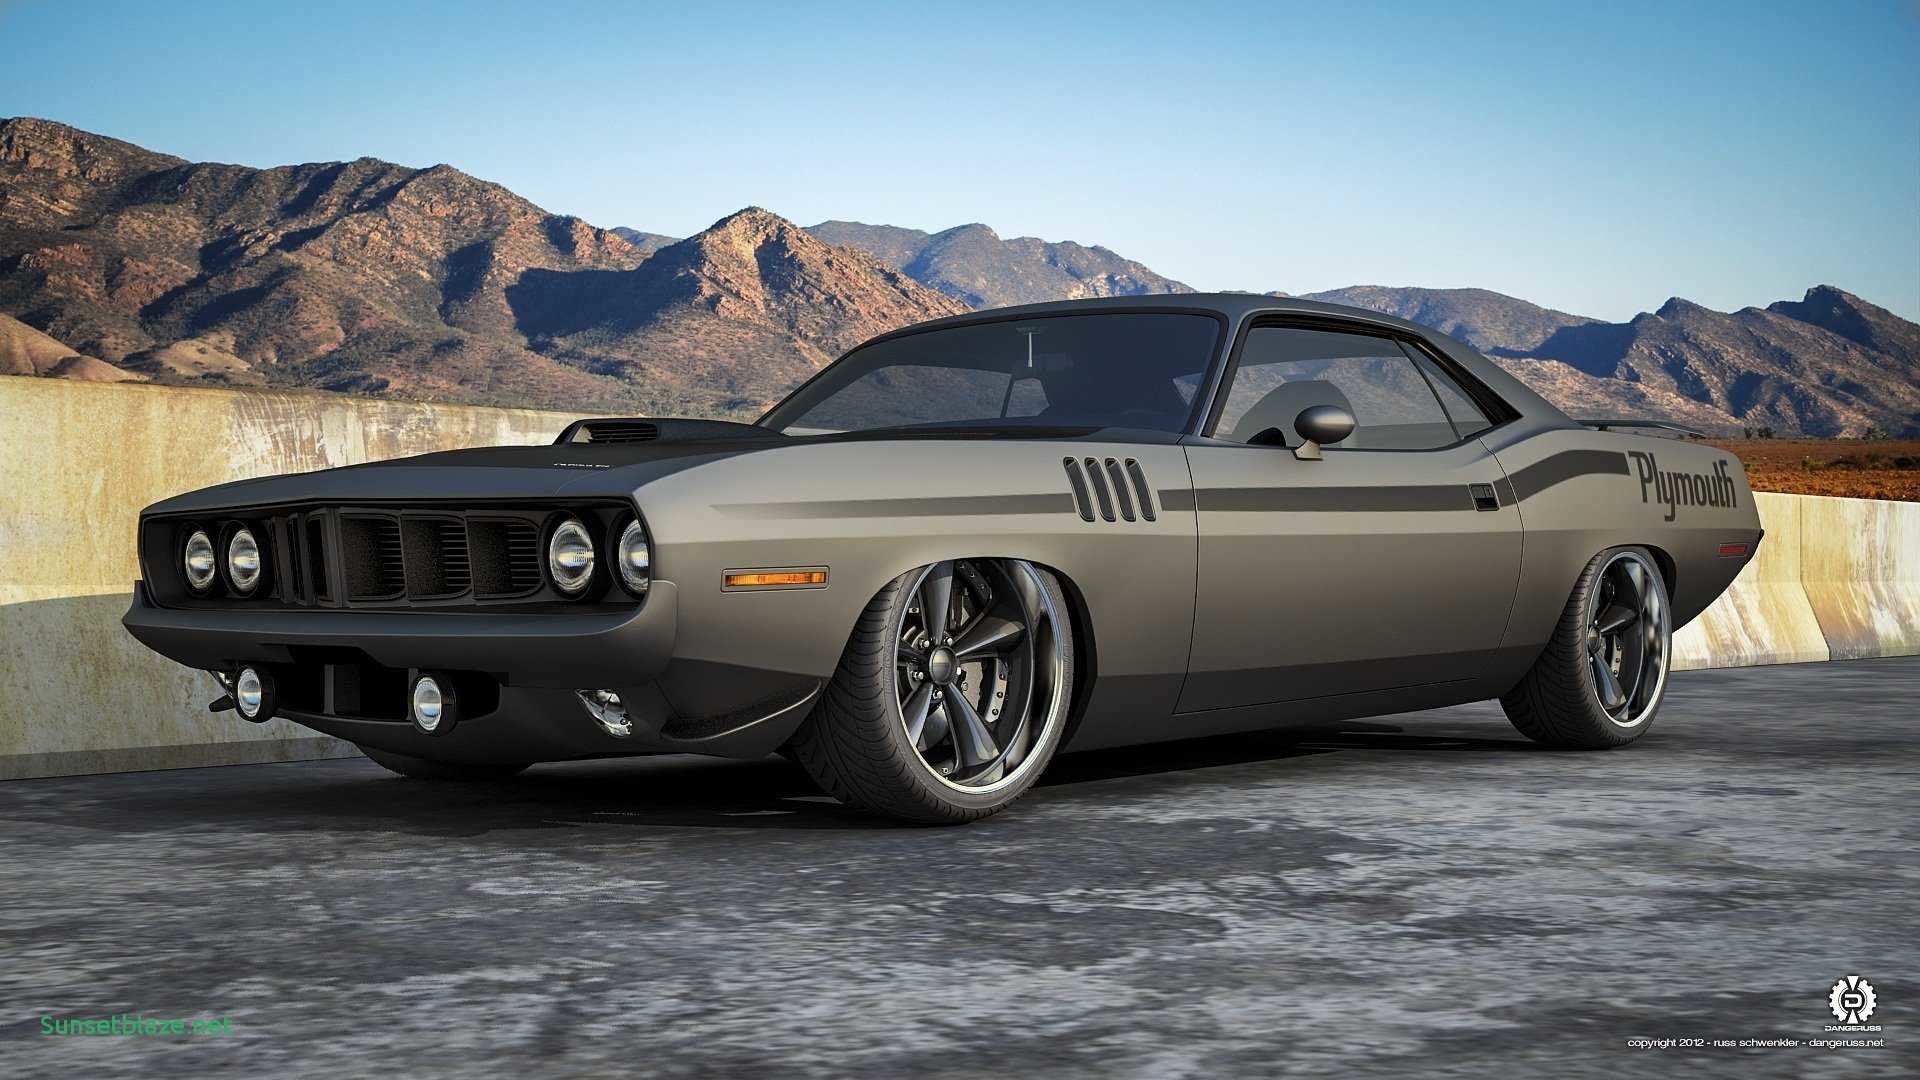 1920x1080 Plymouth Barracuda Muscle Car Front Matte Mountain Hd Wallpaper Unique Of  Hd Flat Black Muscle Car